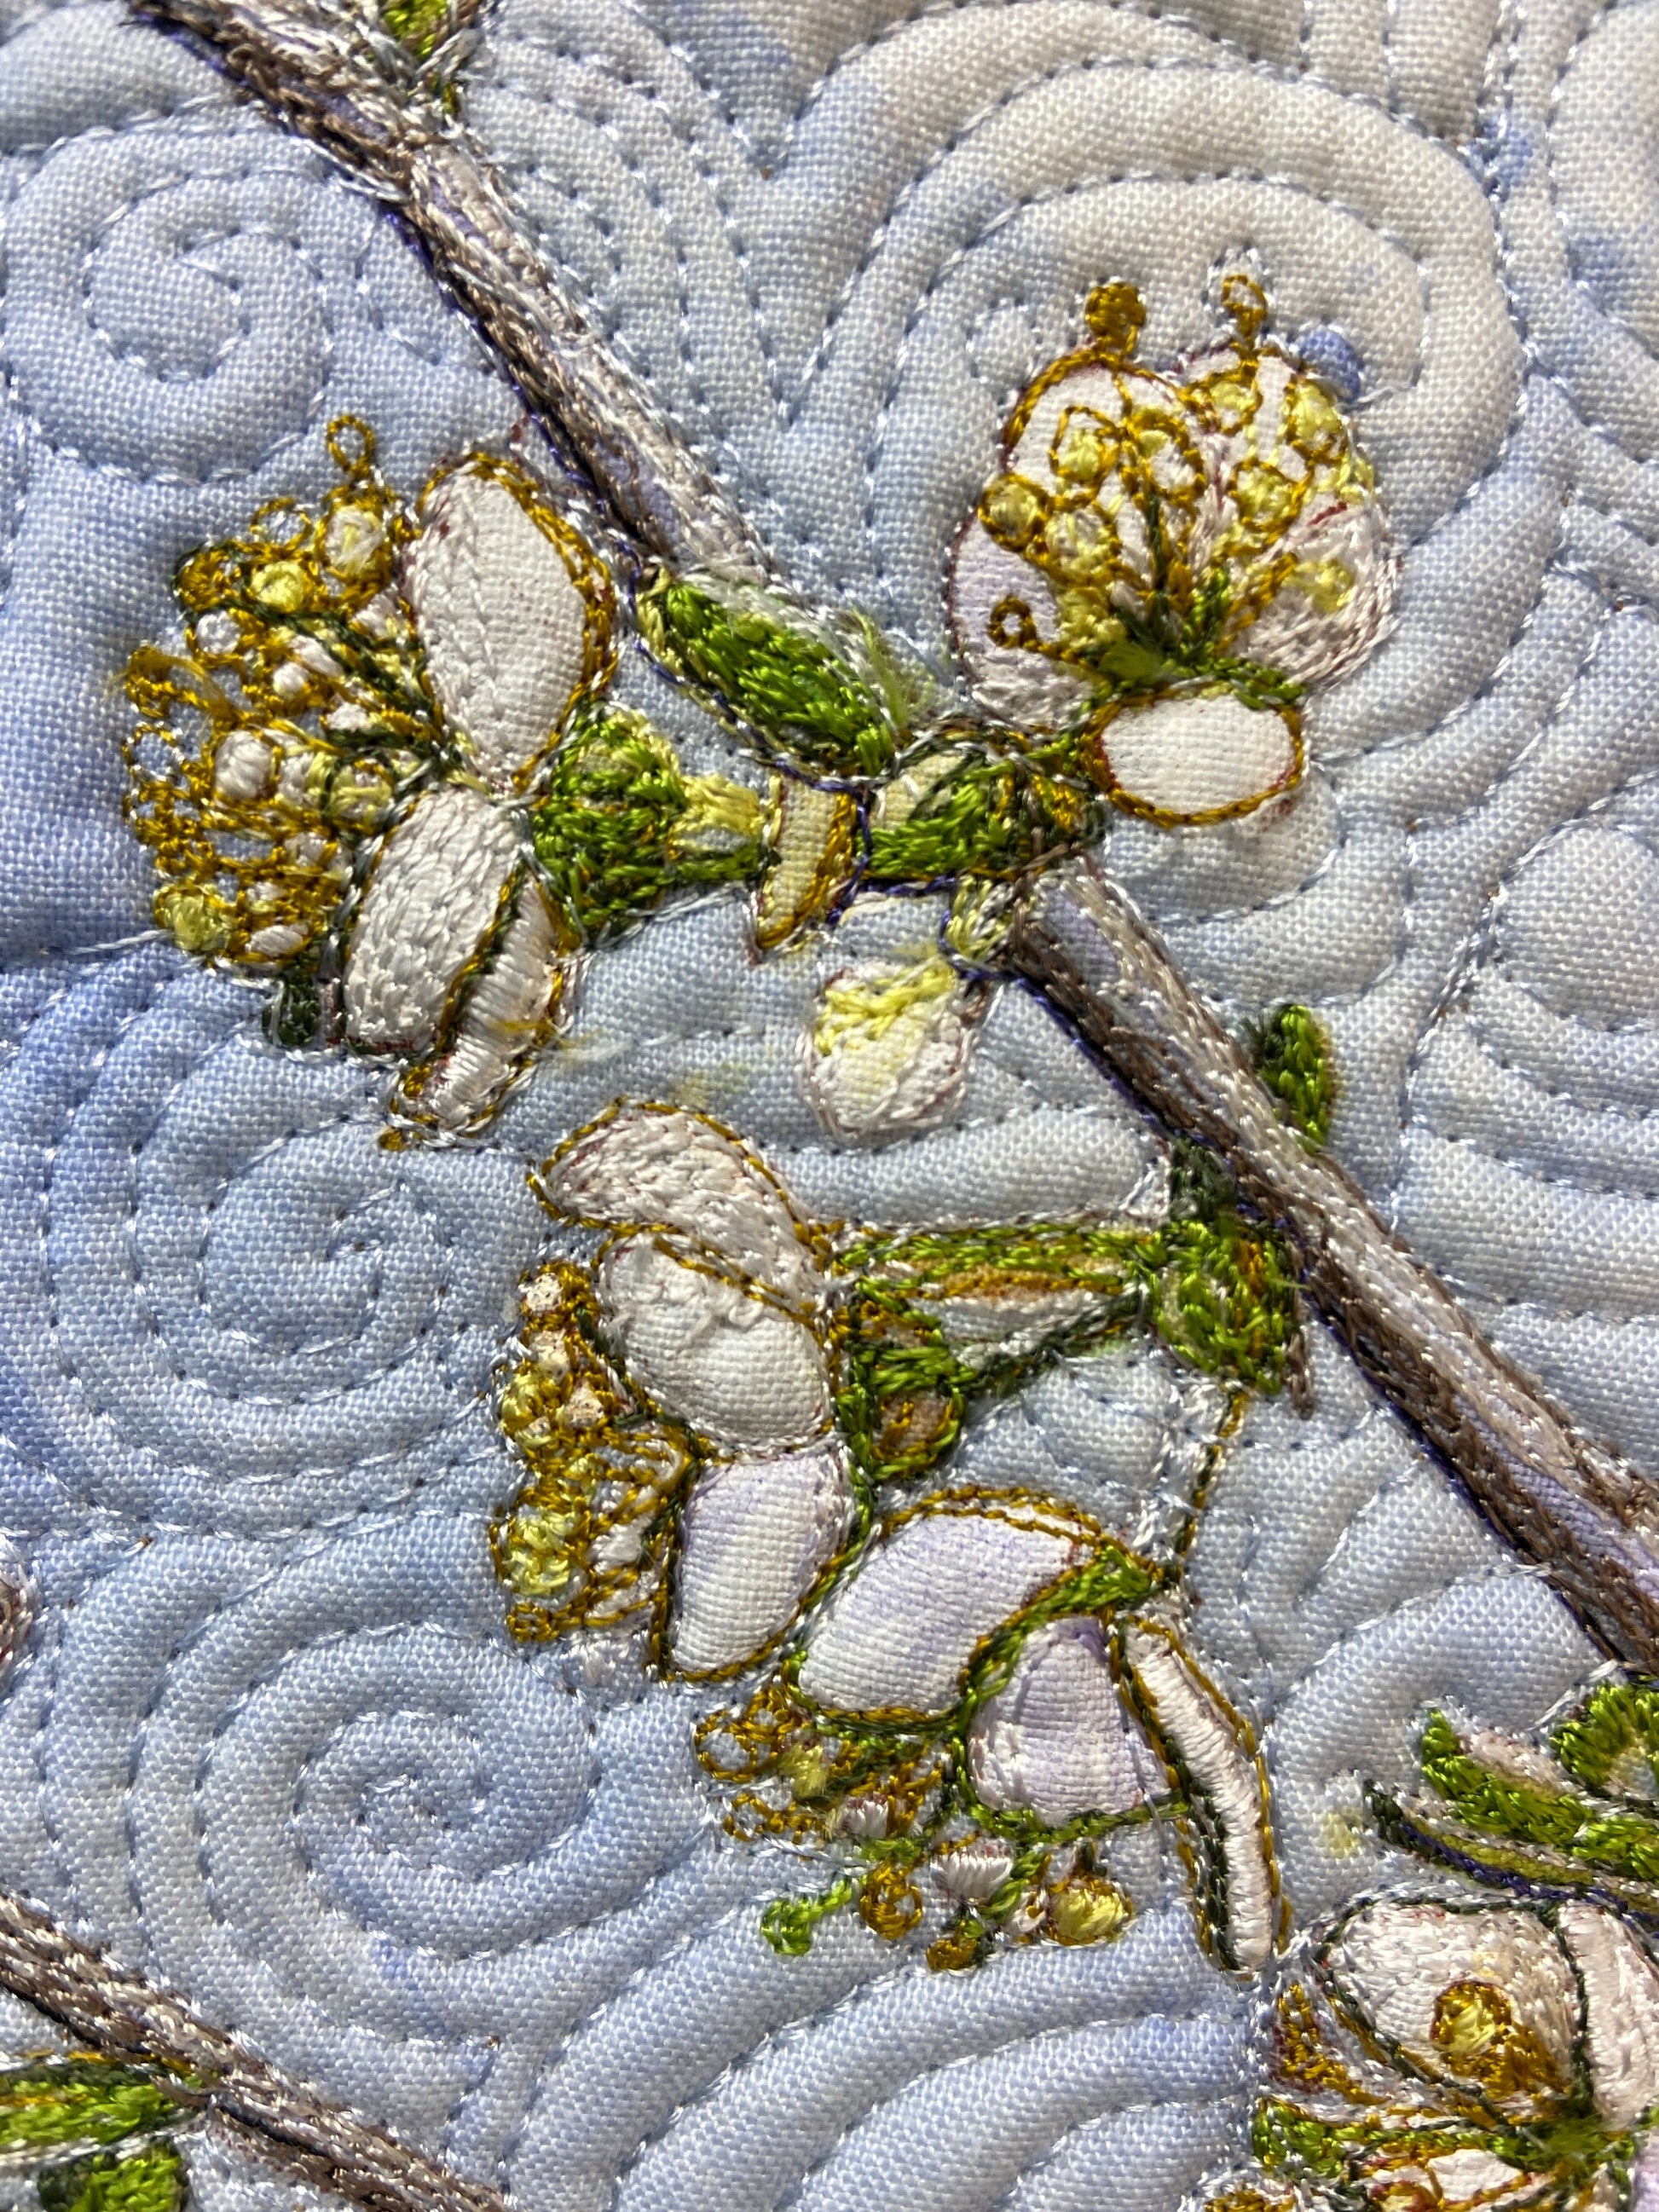 2 Sew Textiles workshop in a box with Julie Haddric